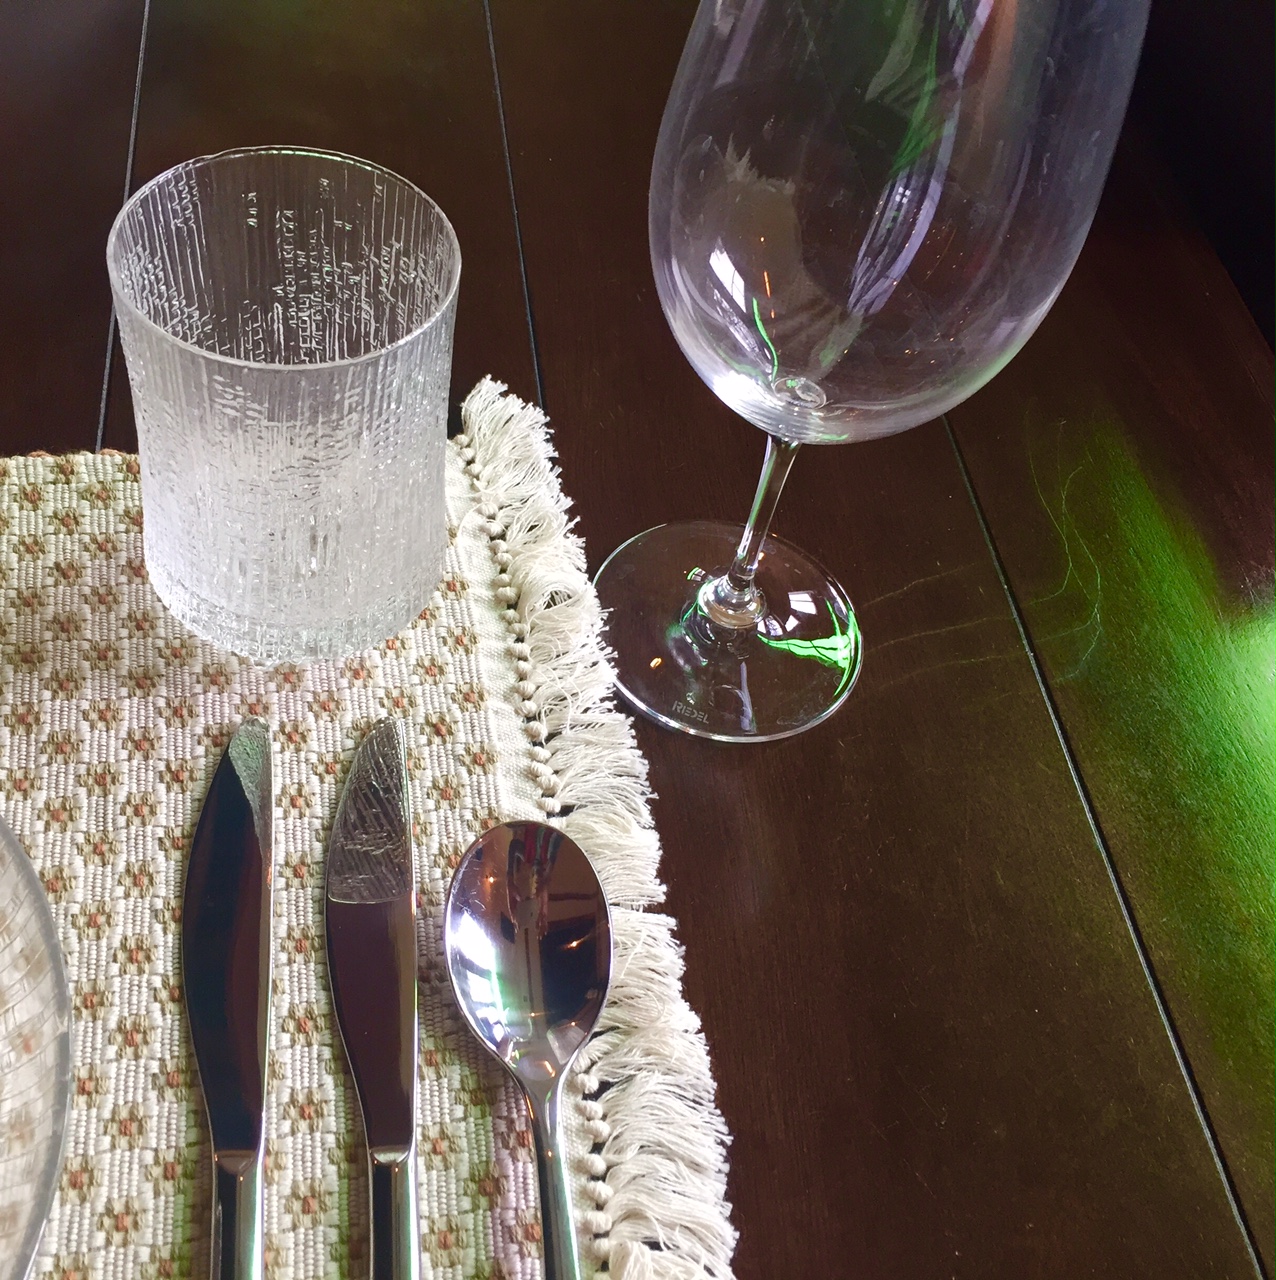 Scenery and settings :: Food and Drink :: Drinking Cup / Goblet, Clear Glass